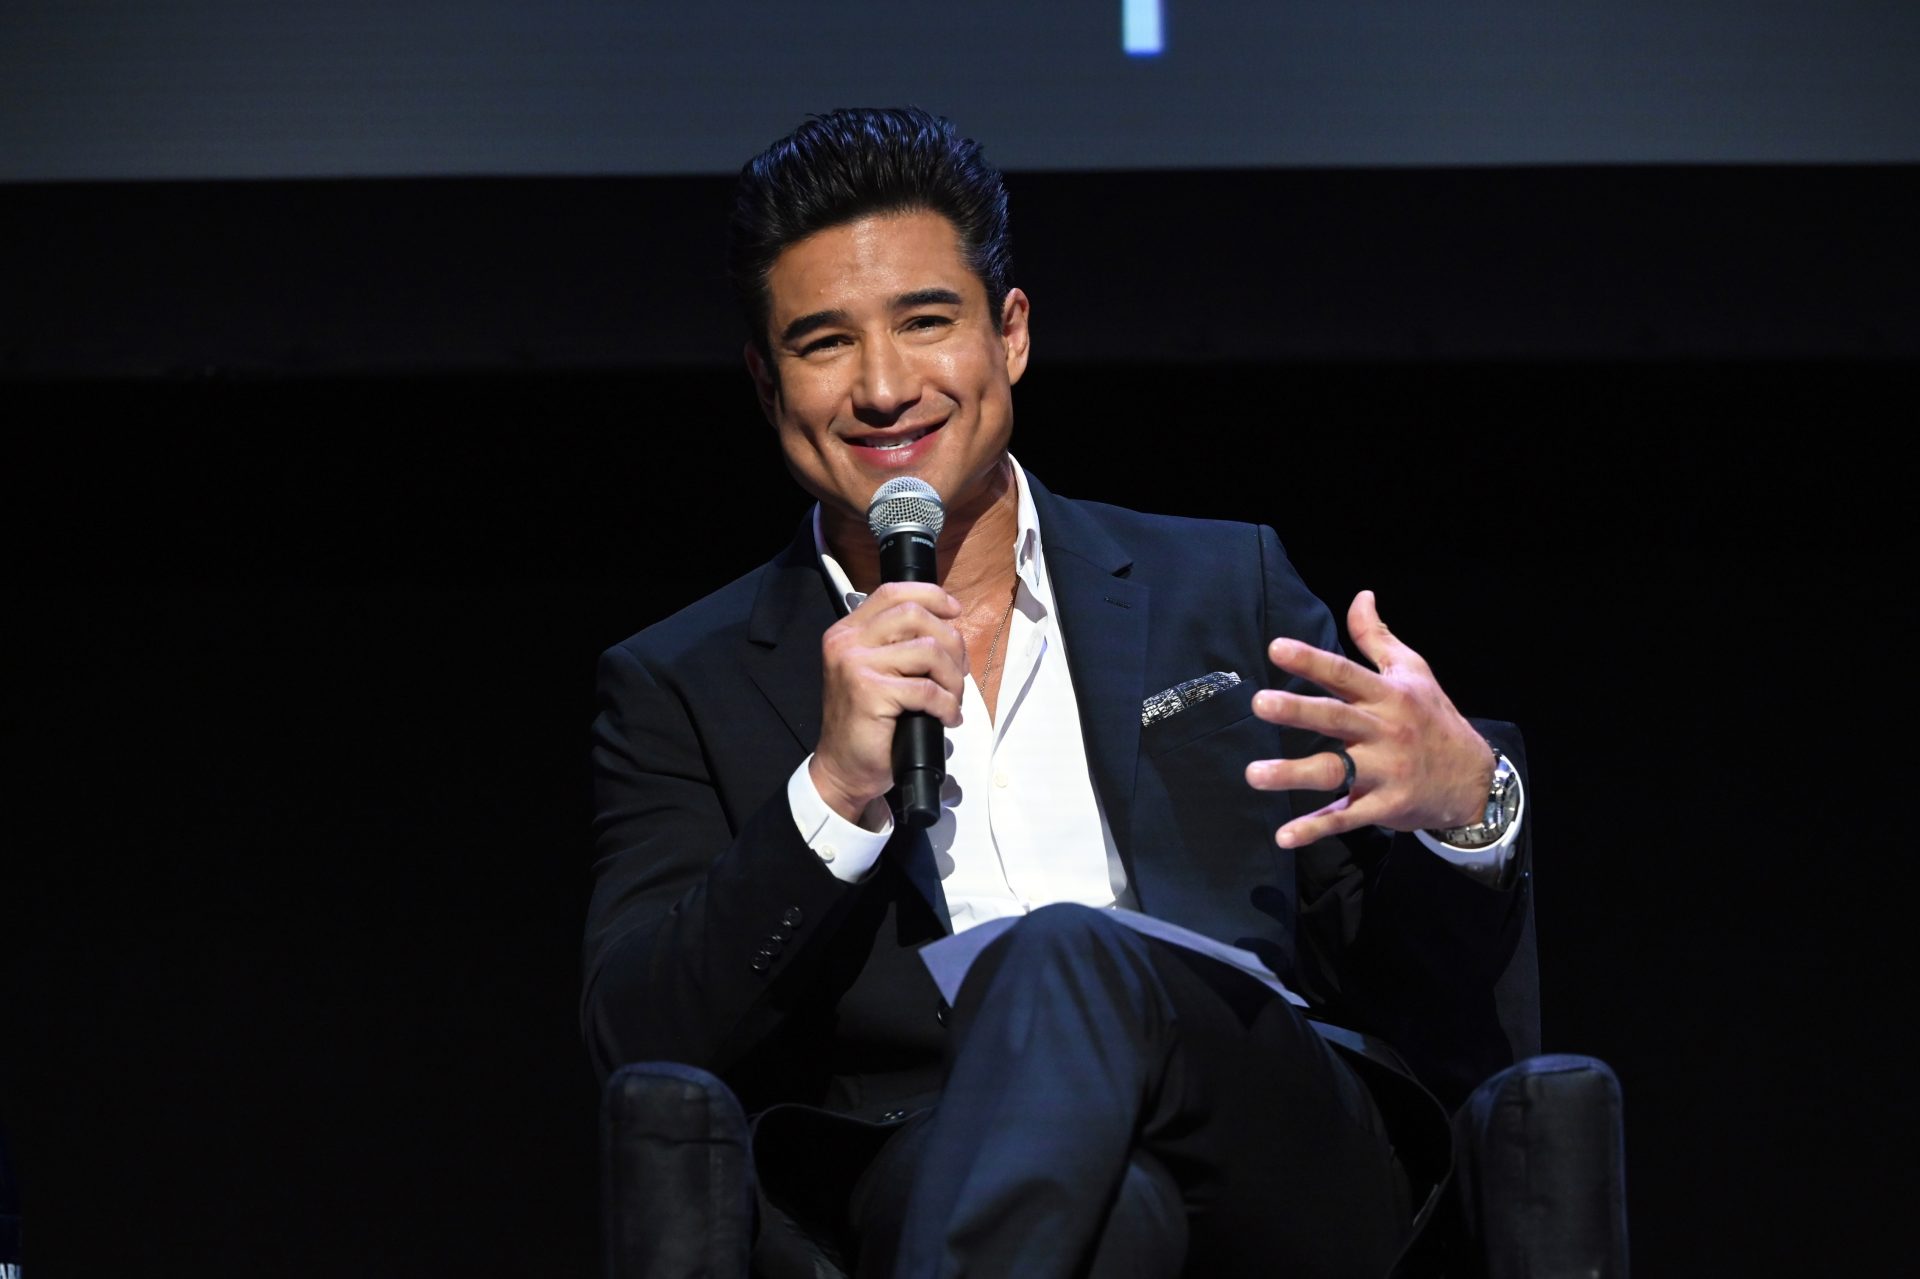 WATCH: Mario Lopez Addresses Code-Switching After Trending In Viral Videos: “I’m Trying To Cash These Checks” thumbnail